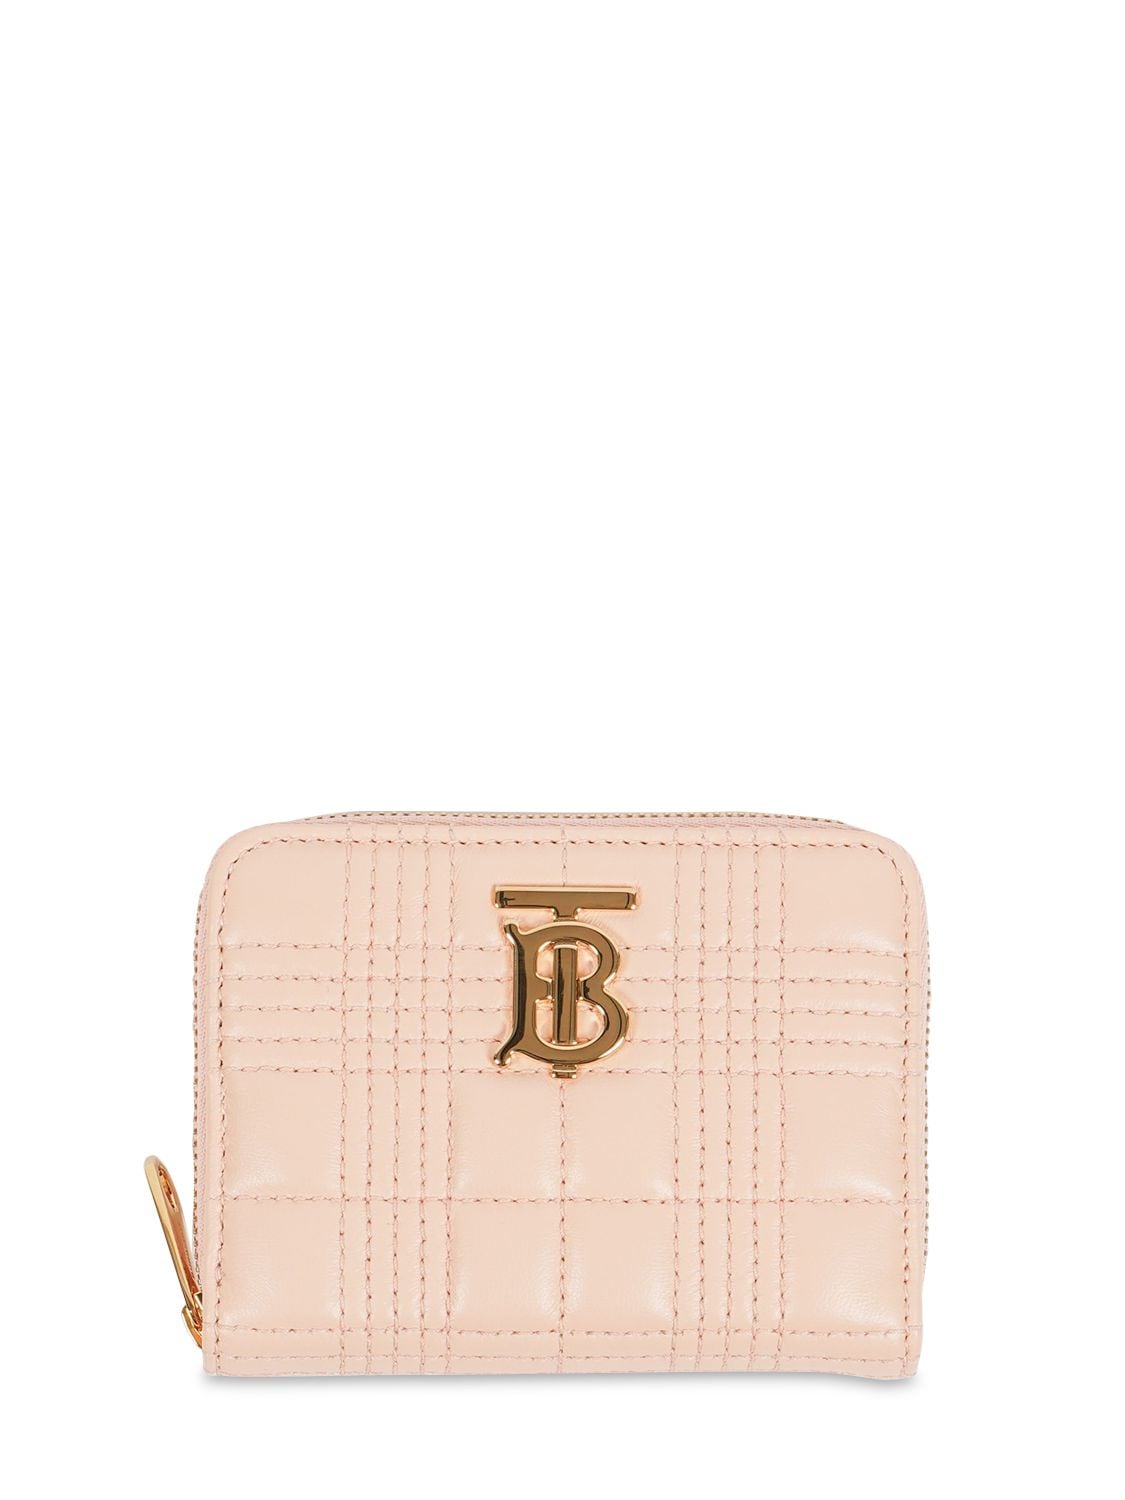 BURBERRY Mini Lola Quilted Leather Zip Wallet